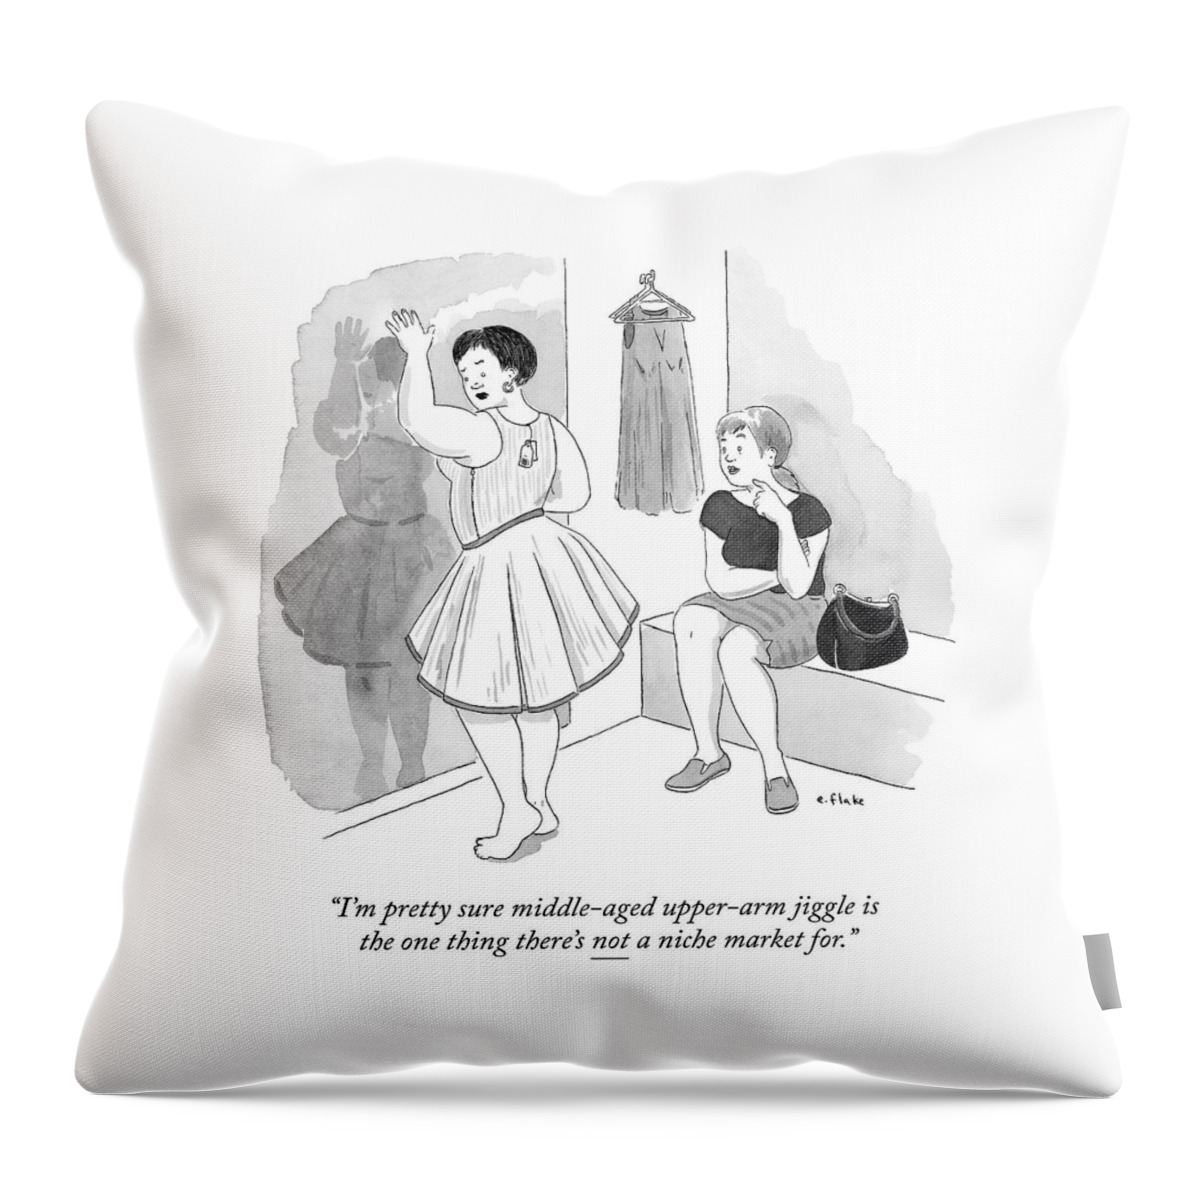 A Middle-aged Woman Poses Her Arm Up Seductively Throw Pillow